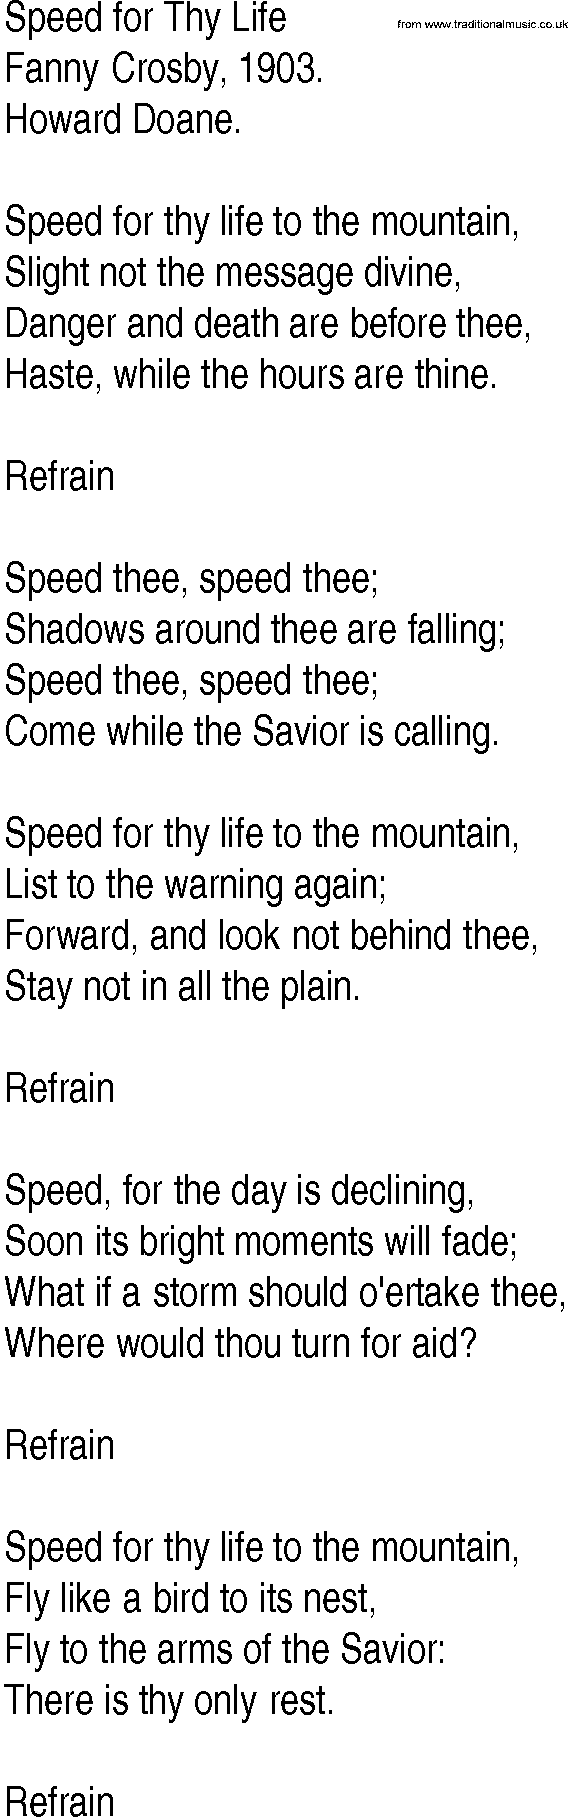 Hymn and Gospel Song: Speed for Thy Life by Fanny Crosby lyrics